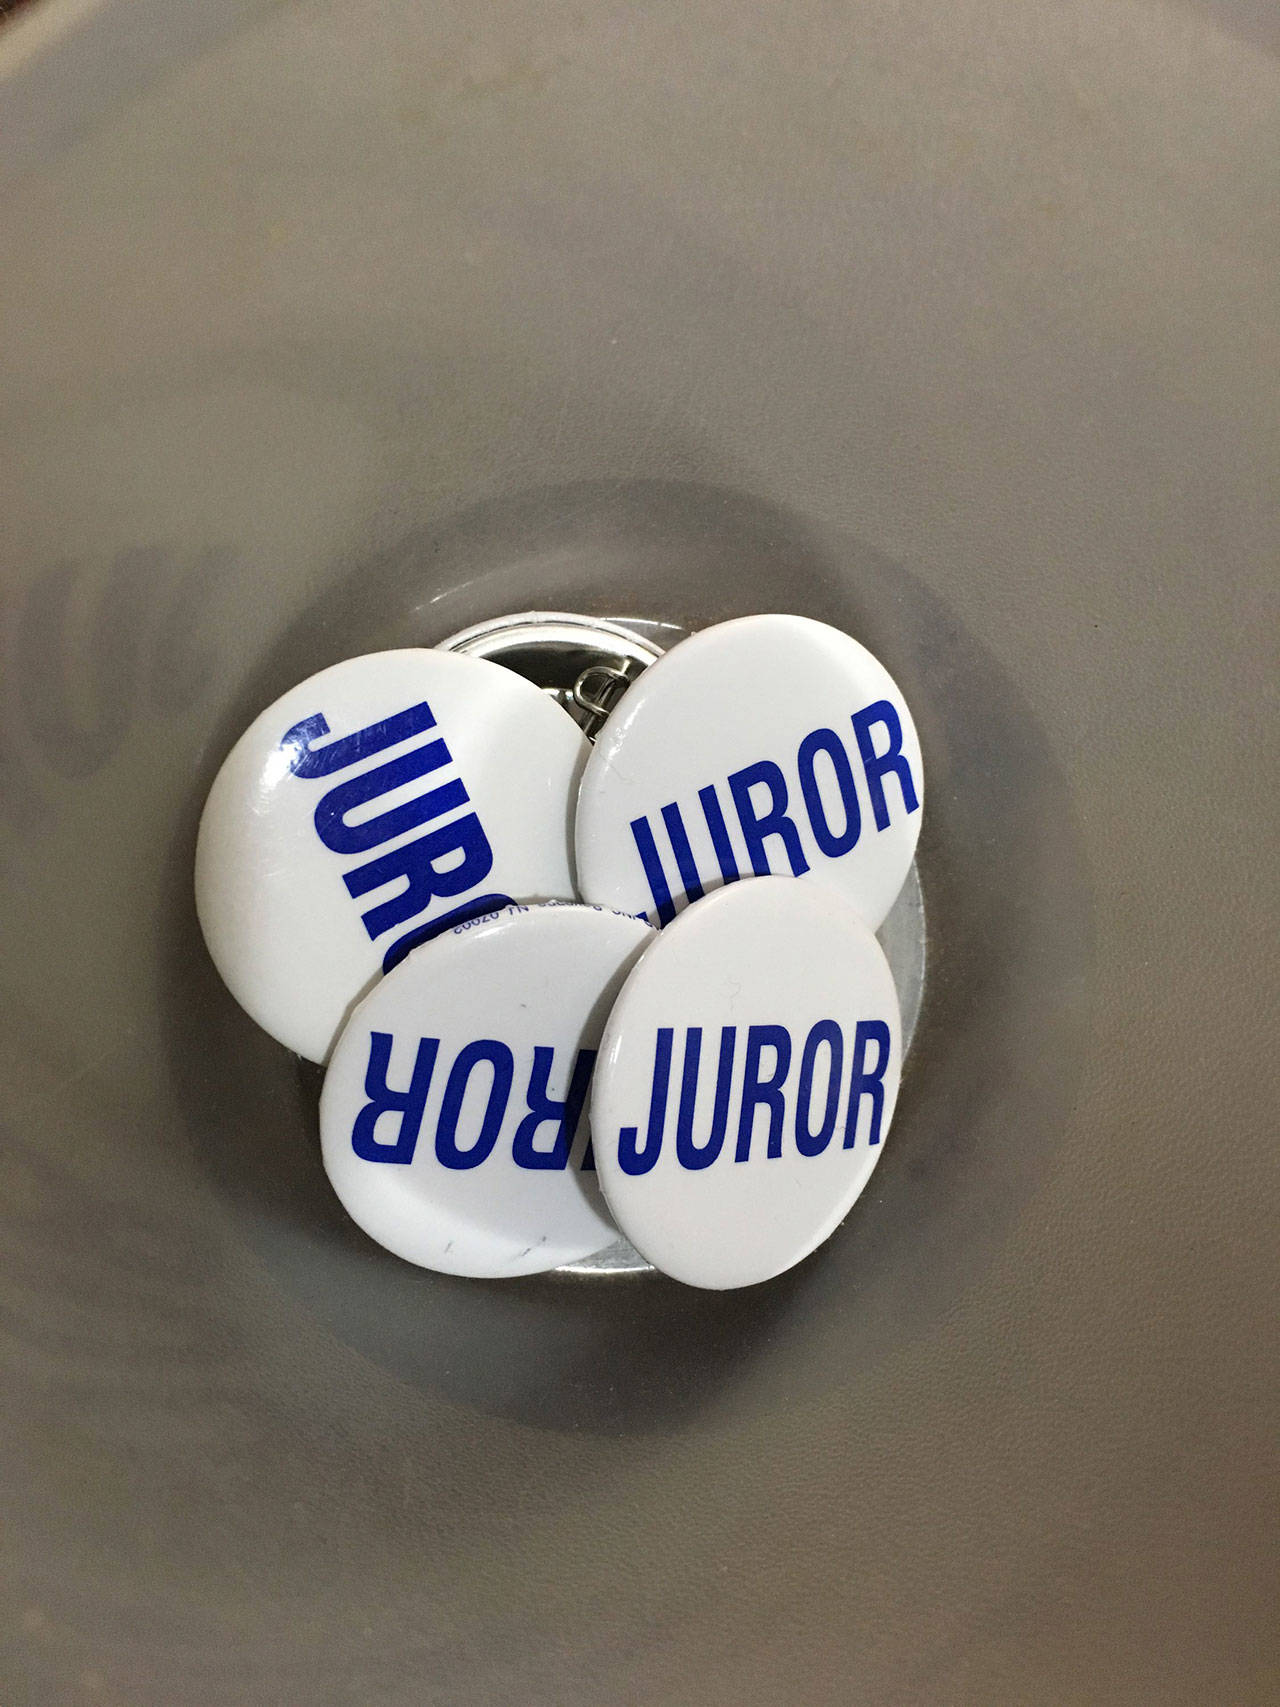 Clallam County jurors must wear a pin inside the courthouse and not talk to anyone other than jurors or courtroom staff. They ask you return the pin, too. Sequim Gazette photo by Matthew Nash